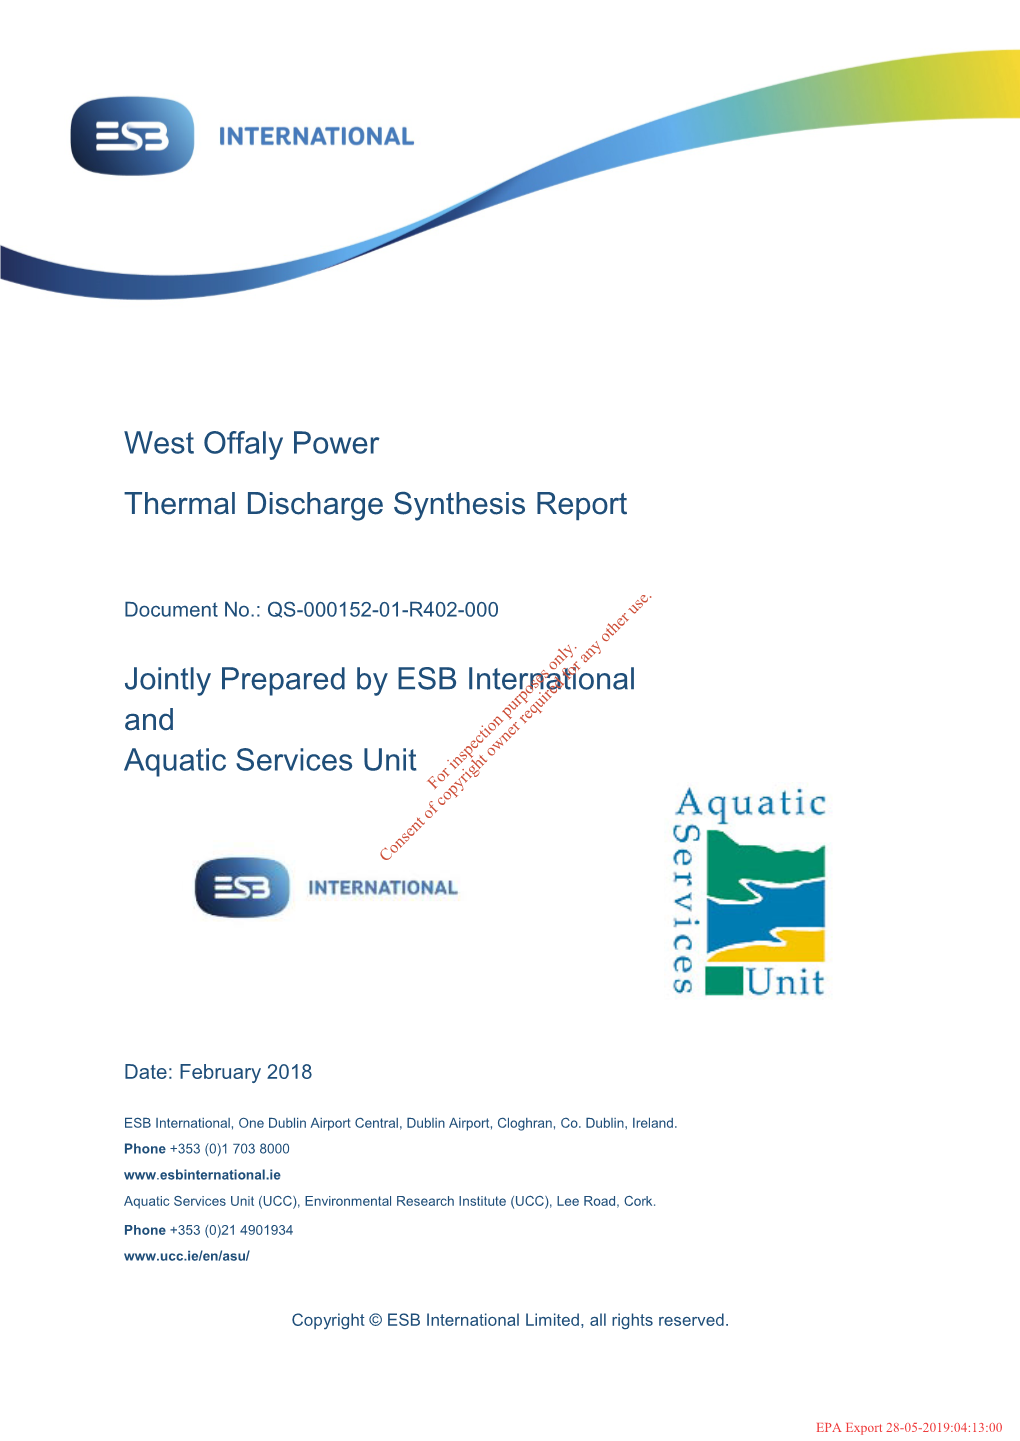 West Offaly Power Thermal Discharge Synthesis Report